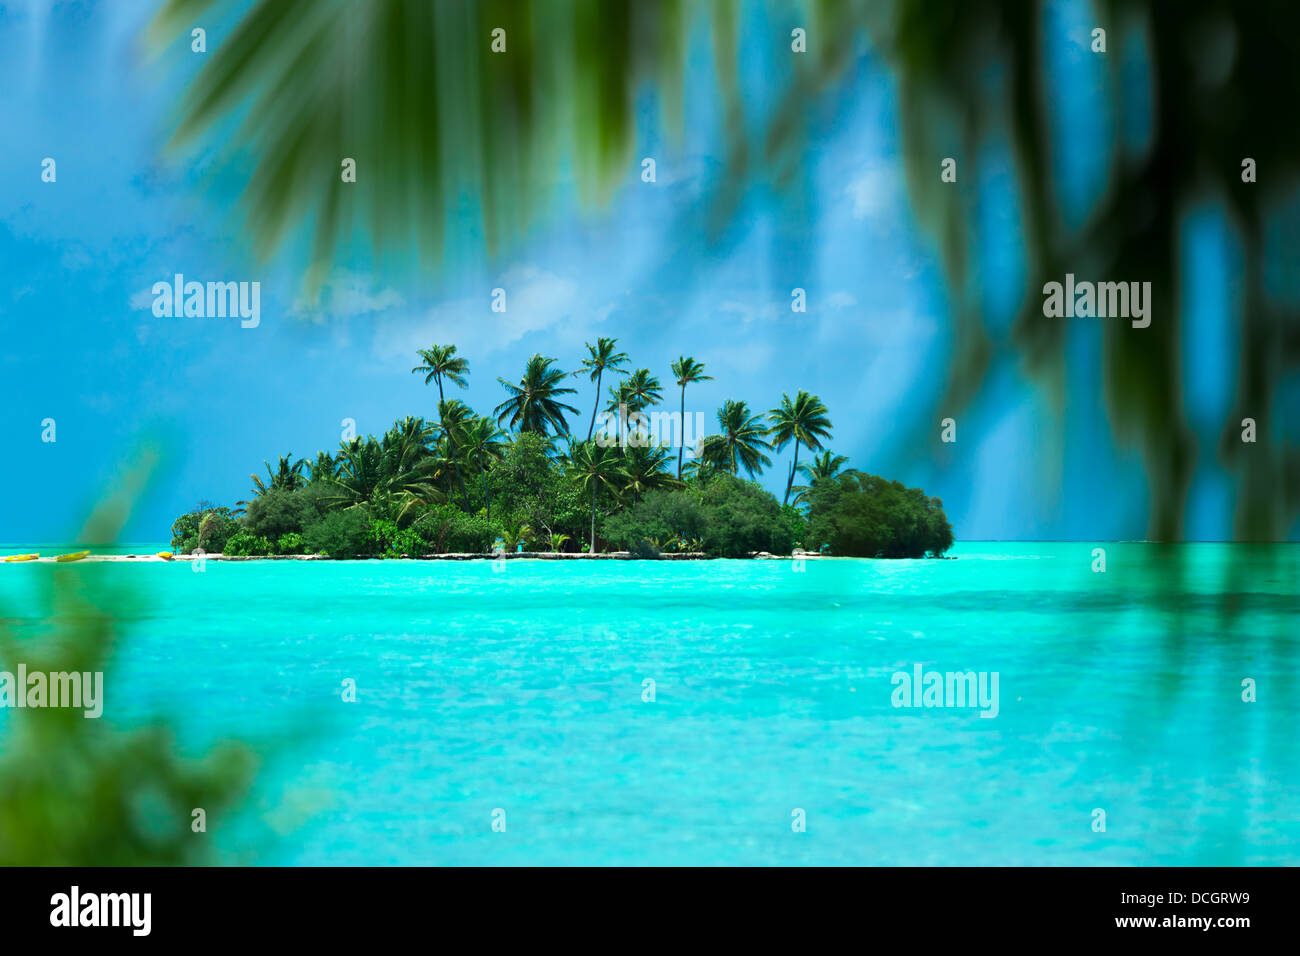 Tropical island in the ocean Stock Photo